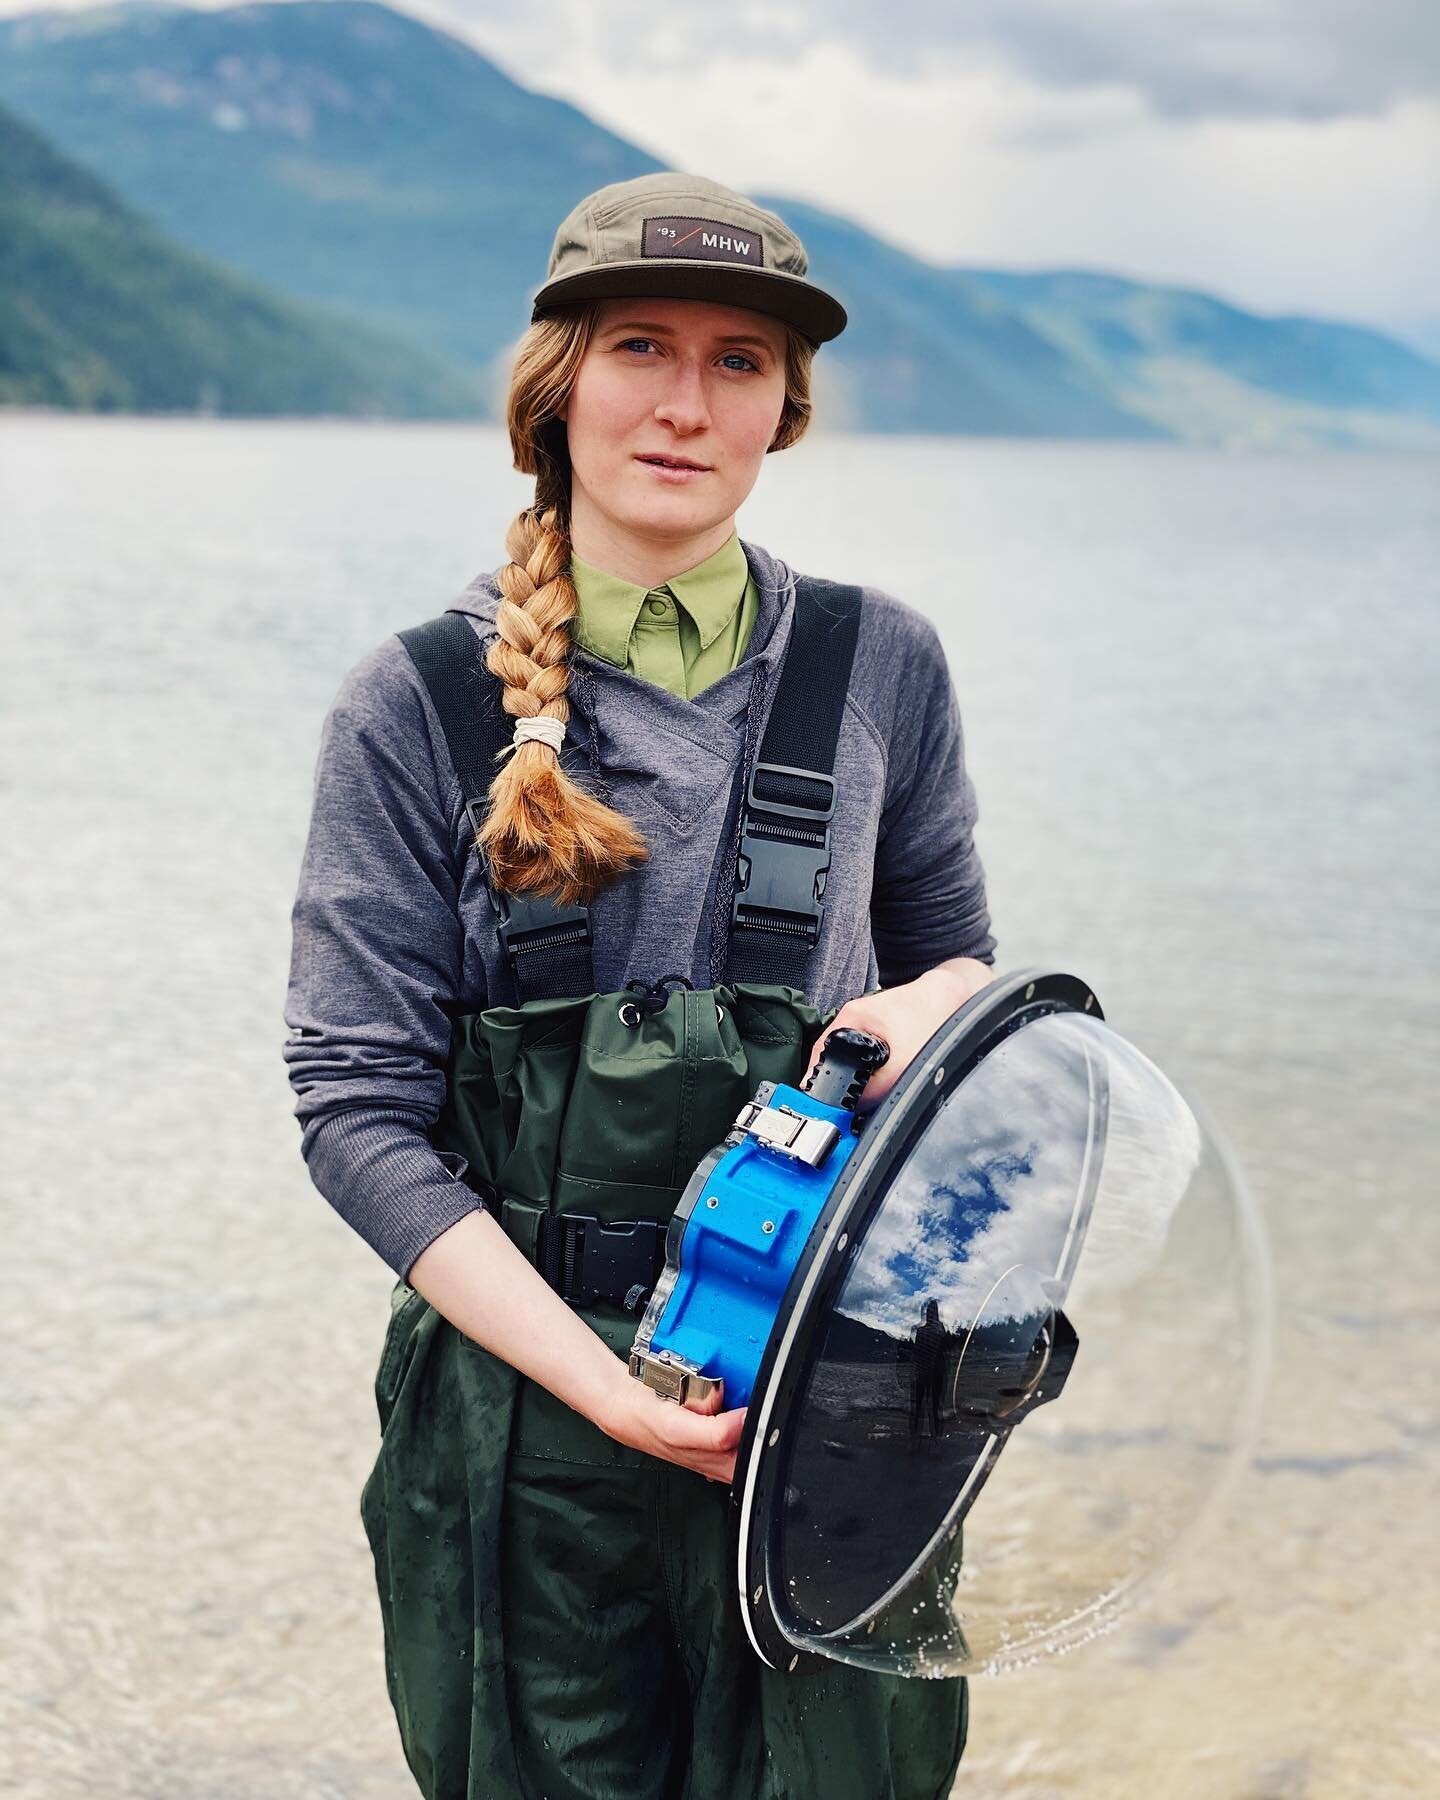 Ashley Voykin, a landscape photographer from Castlegar, British Columbia. Holding a camera within an underwater housing next to Lower Arrow Lake, in the Kootenay Region of British Columbia.